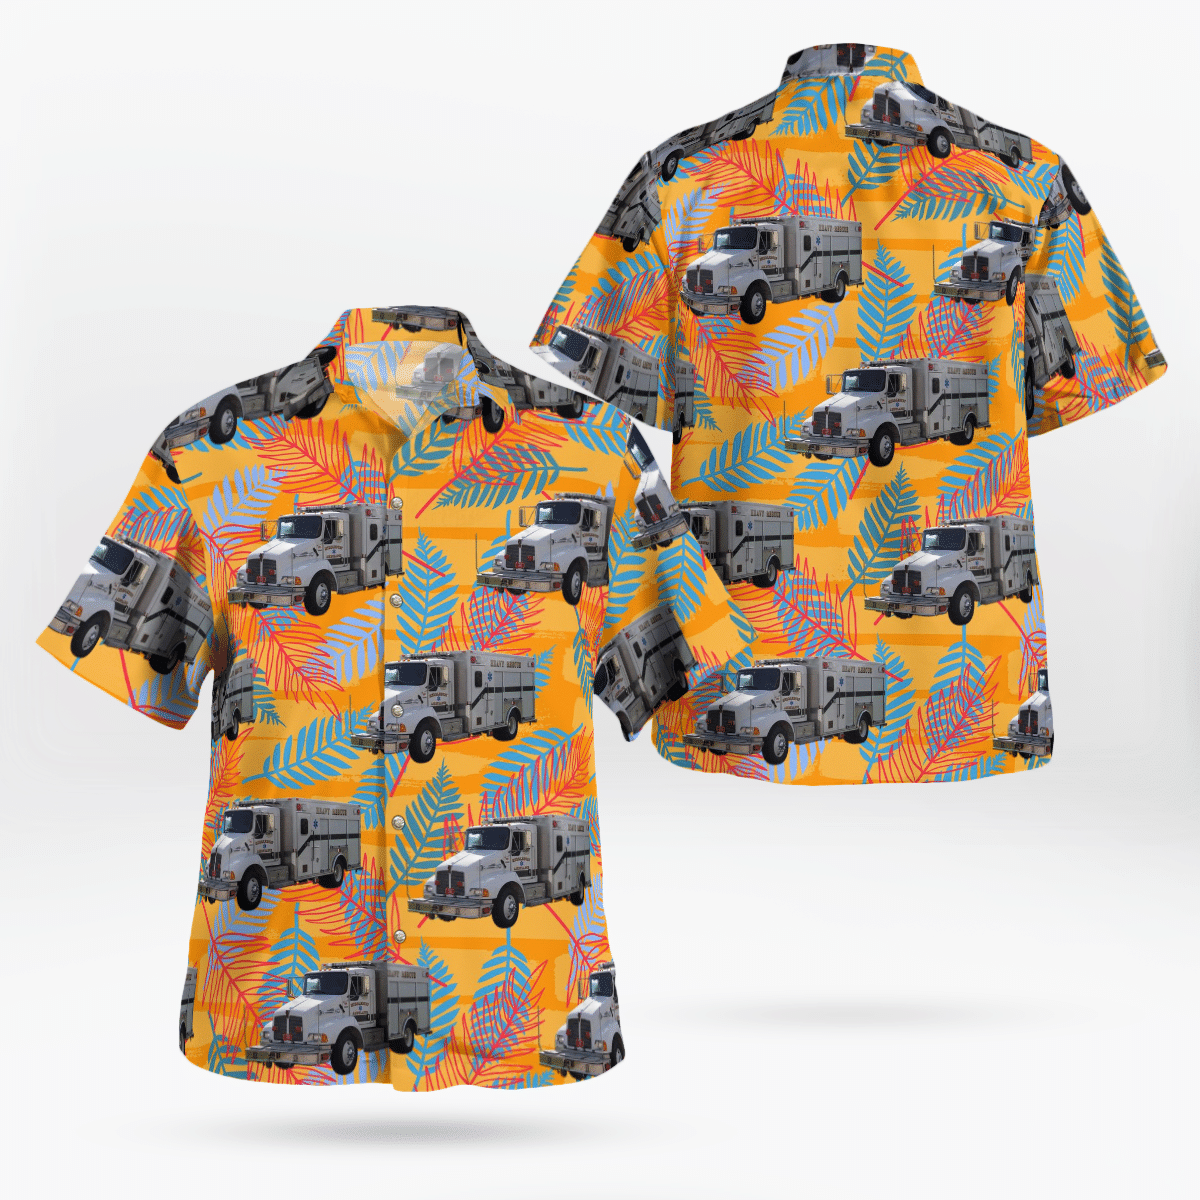 Shop now to find the perfect Hawaii Shirt for your hobby 3